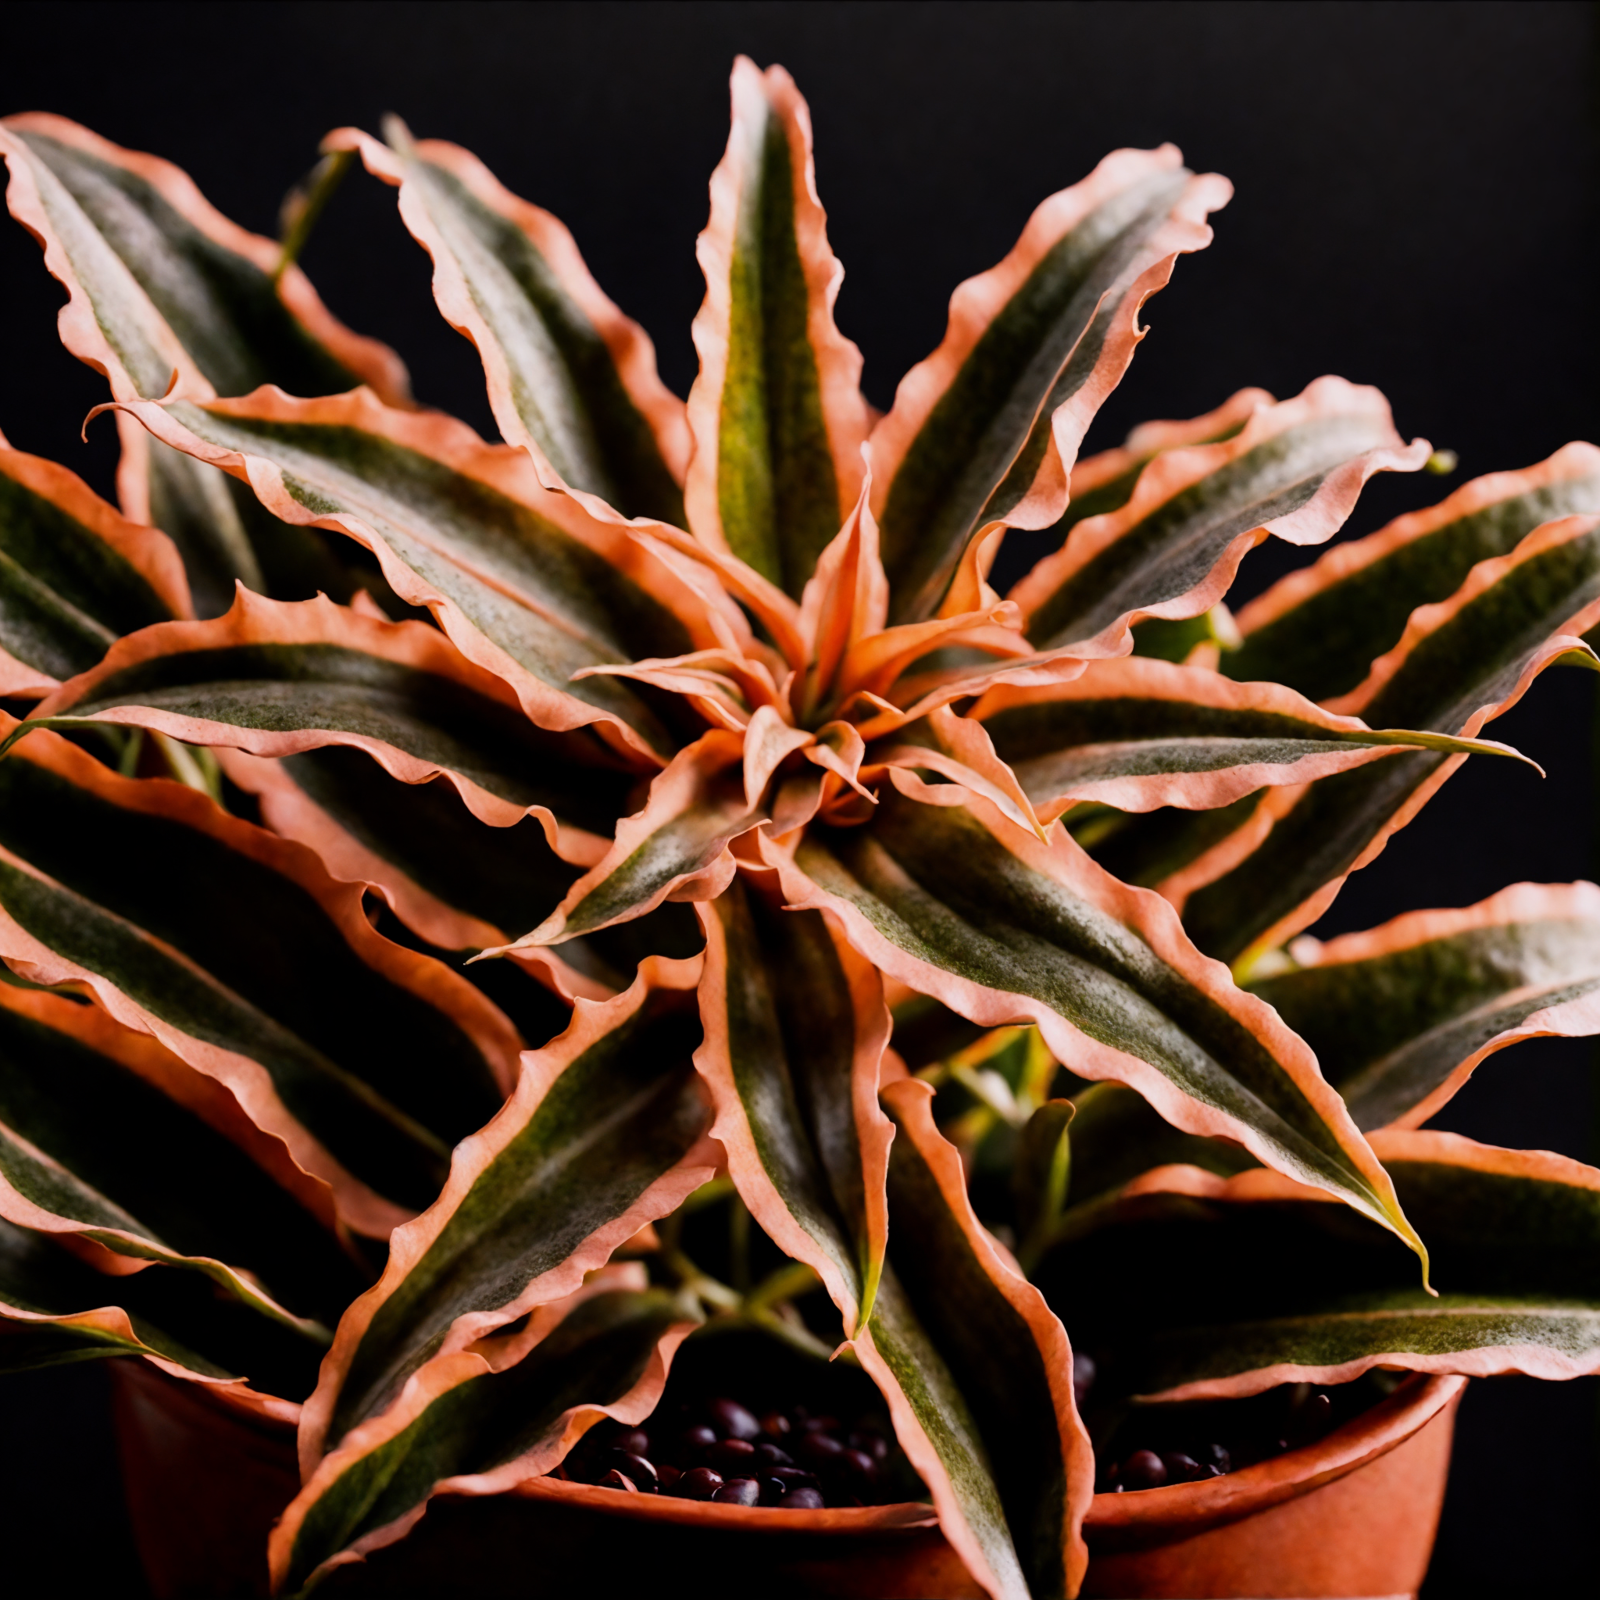 Vibrant red Cryptanthus bivittatus with striped leaves in a bowl, clear indoor lighting, dark background.